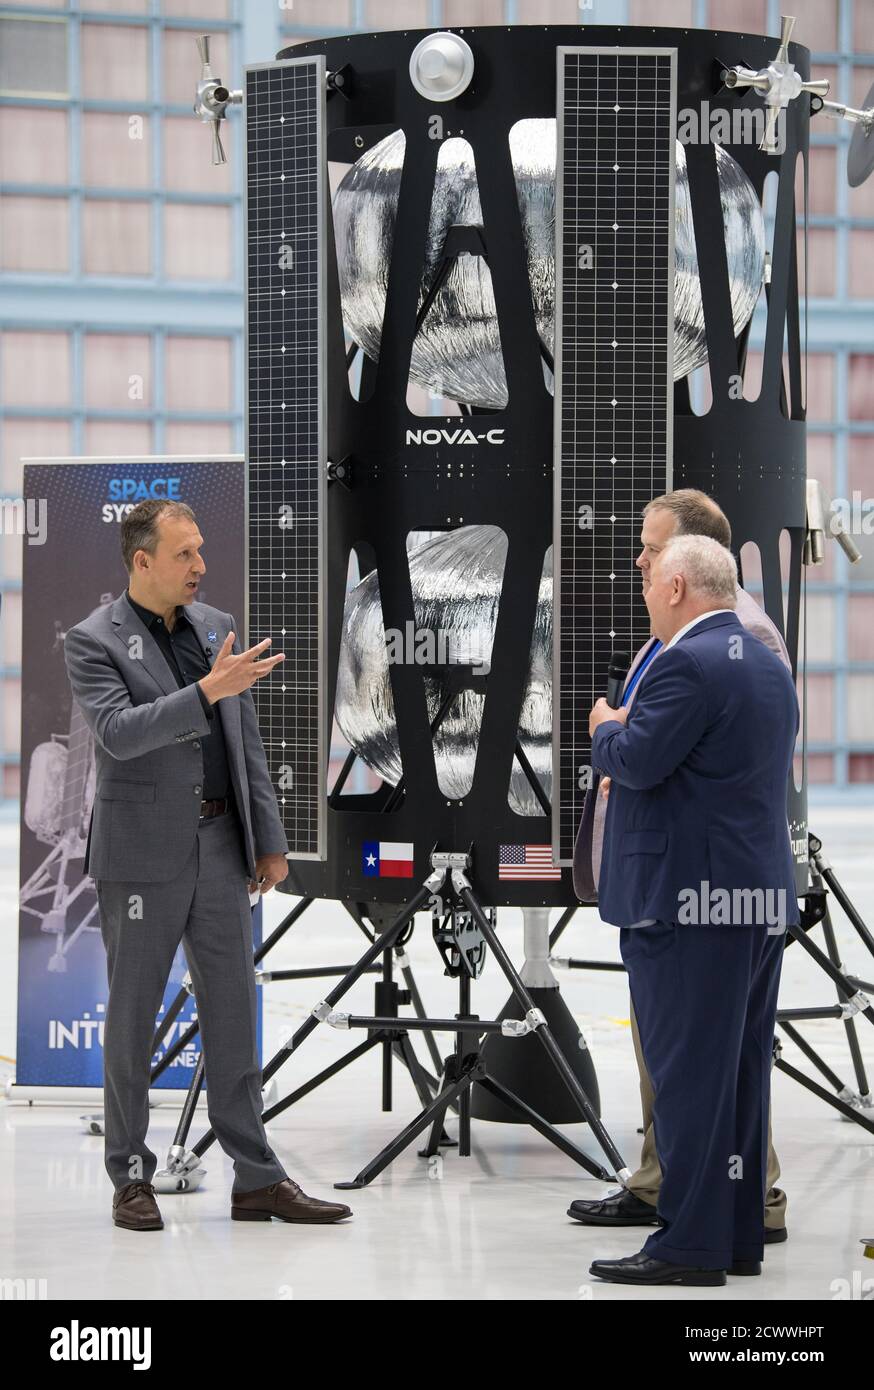 Commercial Lunar Payload Services Announcement NASA Associate Administrator, Science Mission Directorate, Thomas Zurbuchen, left, speaks to, Chairman of the Board of Intuitive Machines, Kam Ghaffarian, right, and VP of Research and Development of Intuitive Machines, Tim Crain, second from right, about their lunar lander, Friday, May 31, 2019, at Goddard Space Flight Center in Md. Astrobotic, Intuitive Machines, and Orbit Beyond have been selected to provide the first lunar landers for the Artemis program's lunar surface exploration. ' Stock Photo